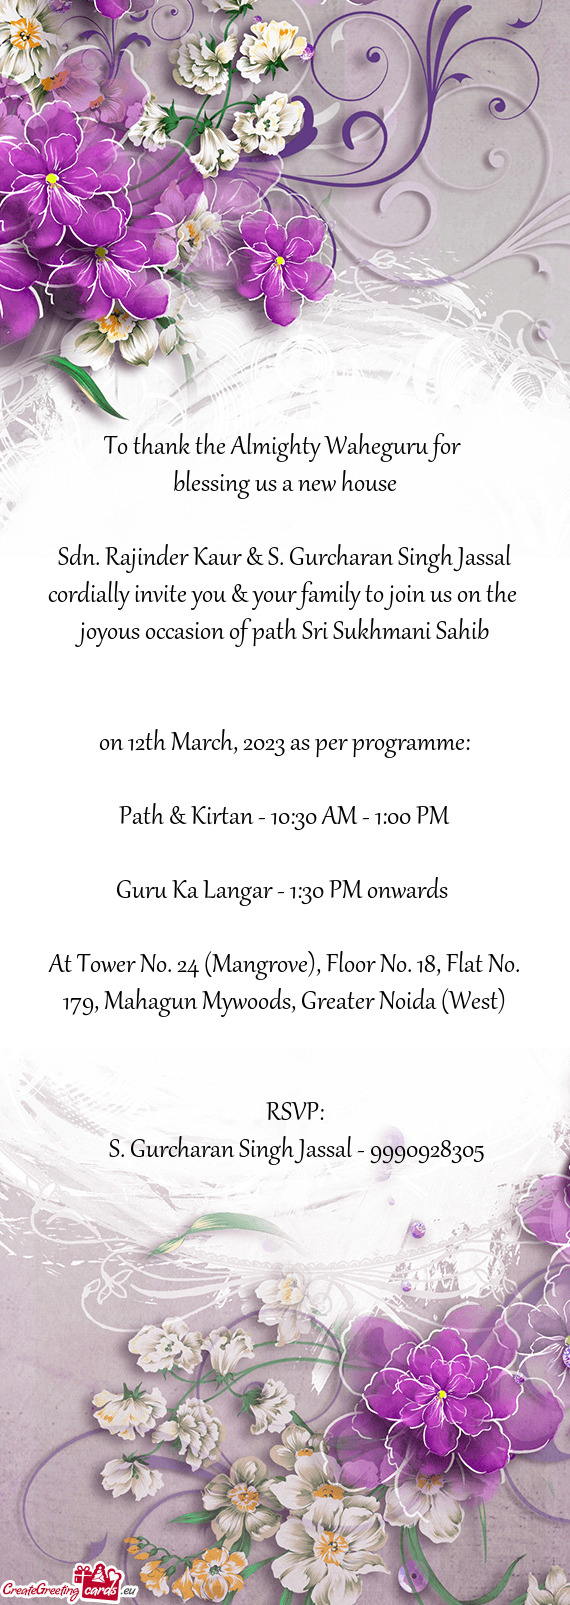 On 12th March, 2023 as per programme